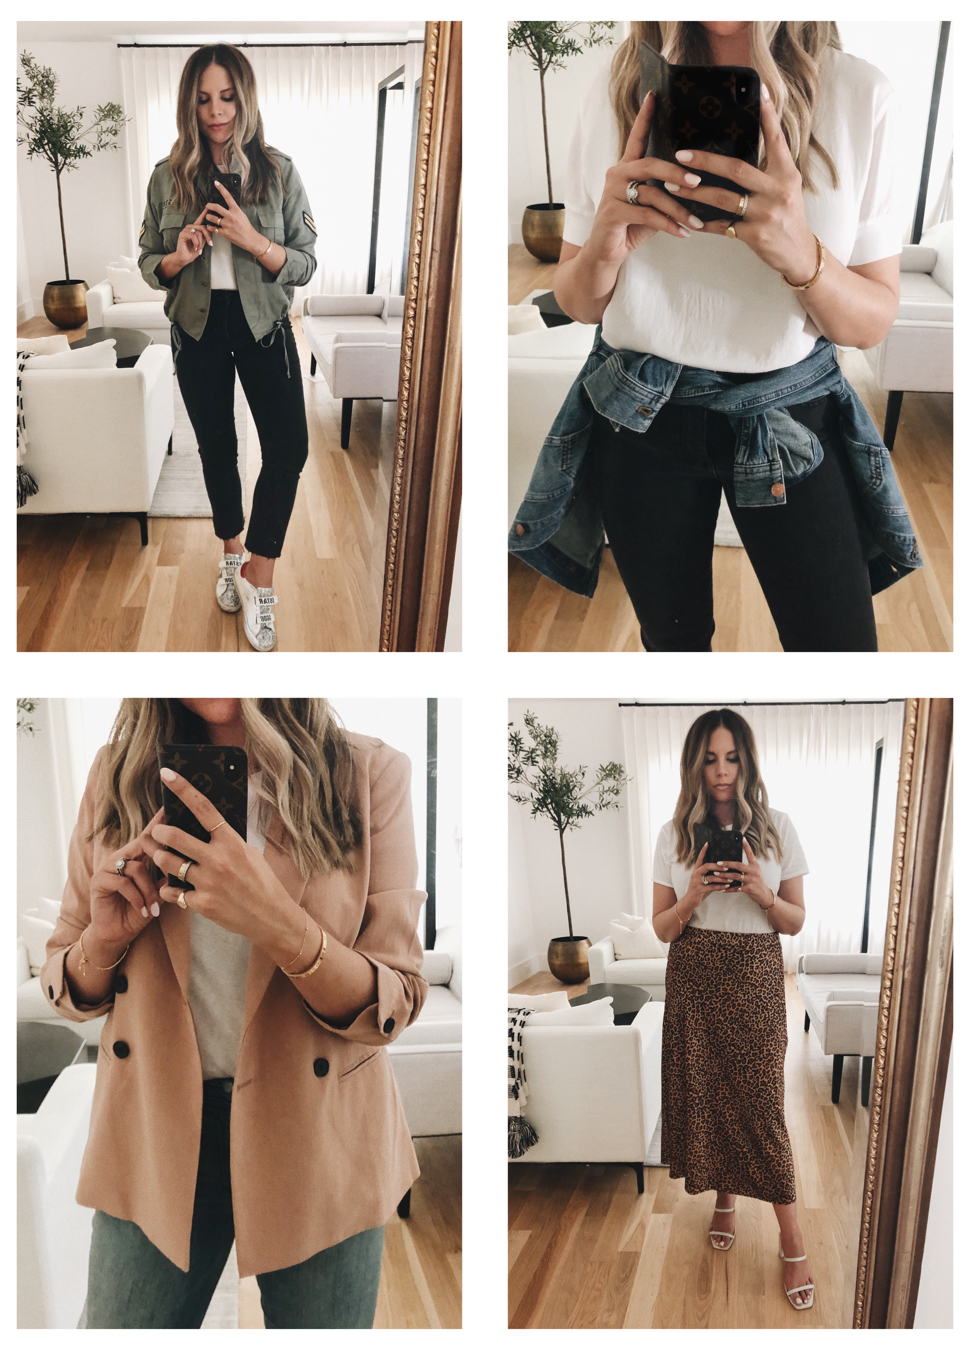 10 Outfits From The Nordstrom Anniversary Sale 2019